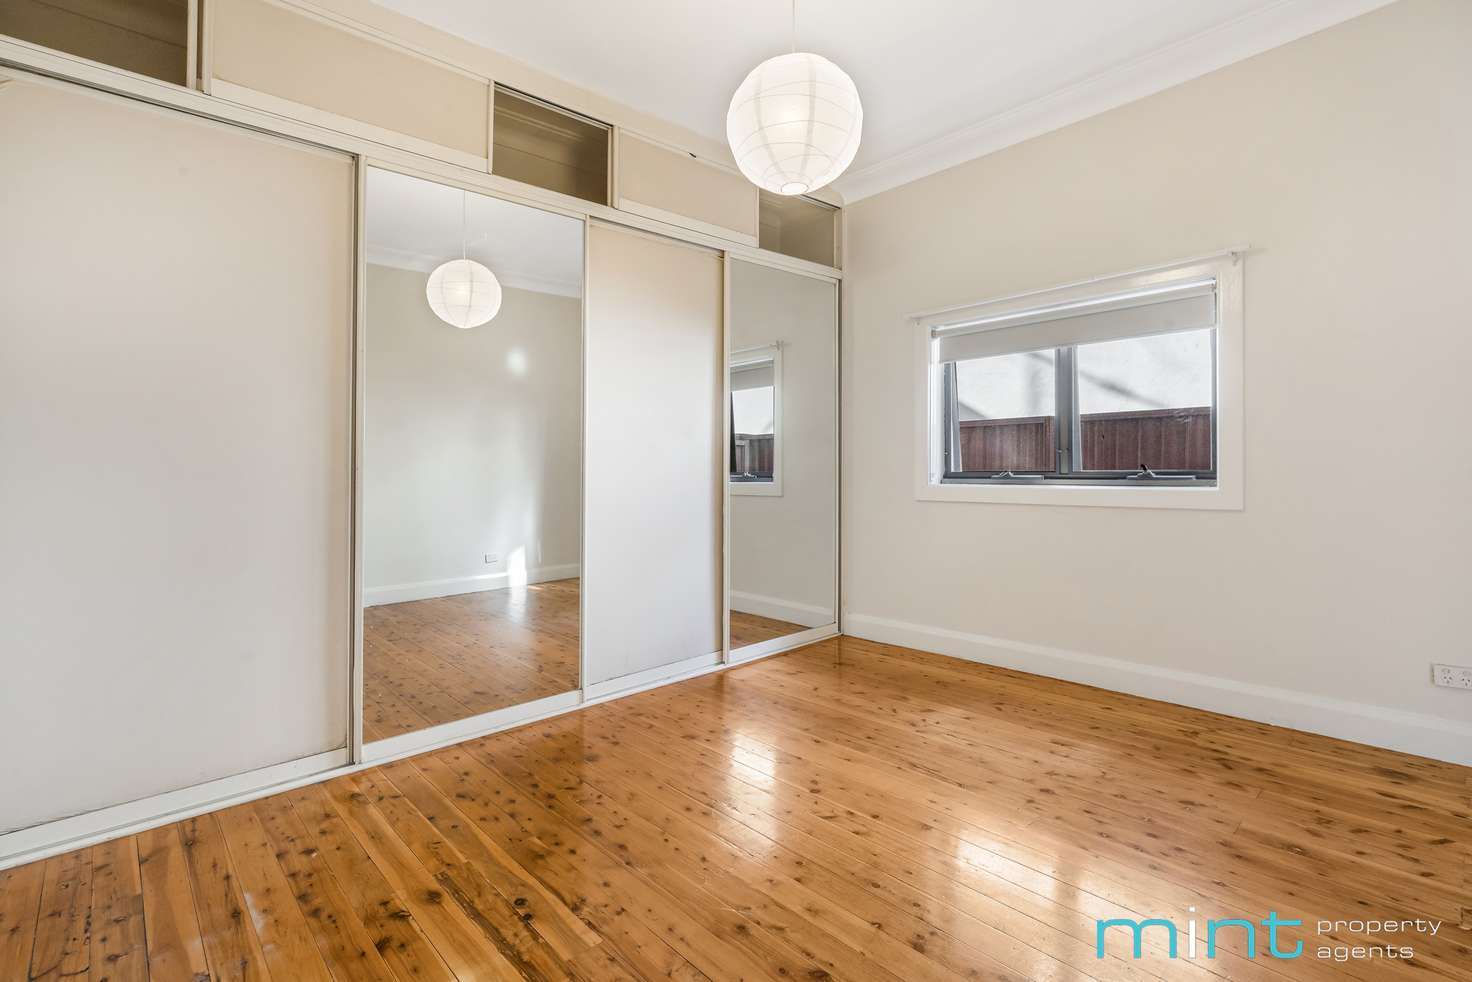 Main view of Homely house listing, 318 Doncaster Avenue, Kingsford NSW 2032